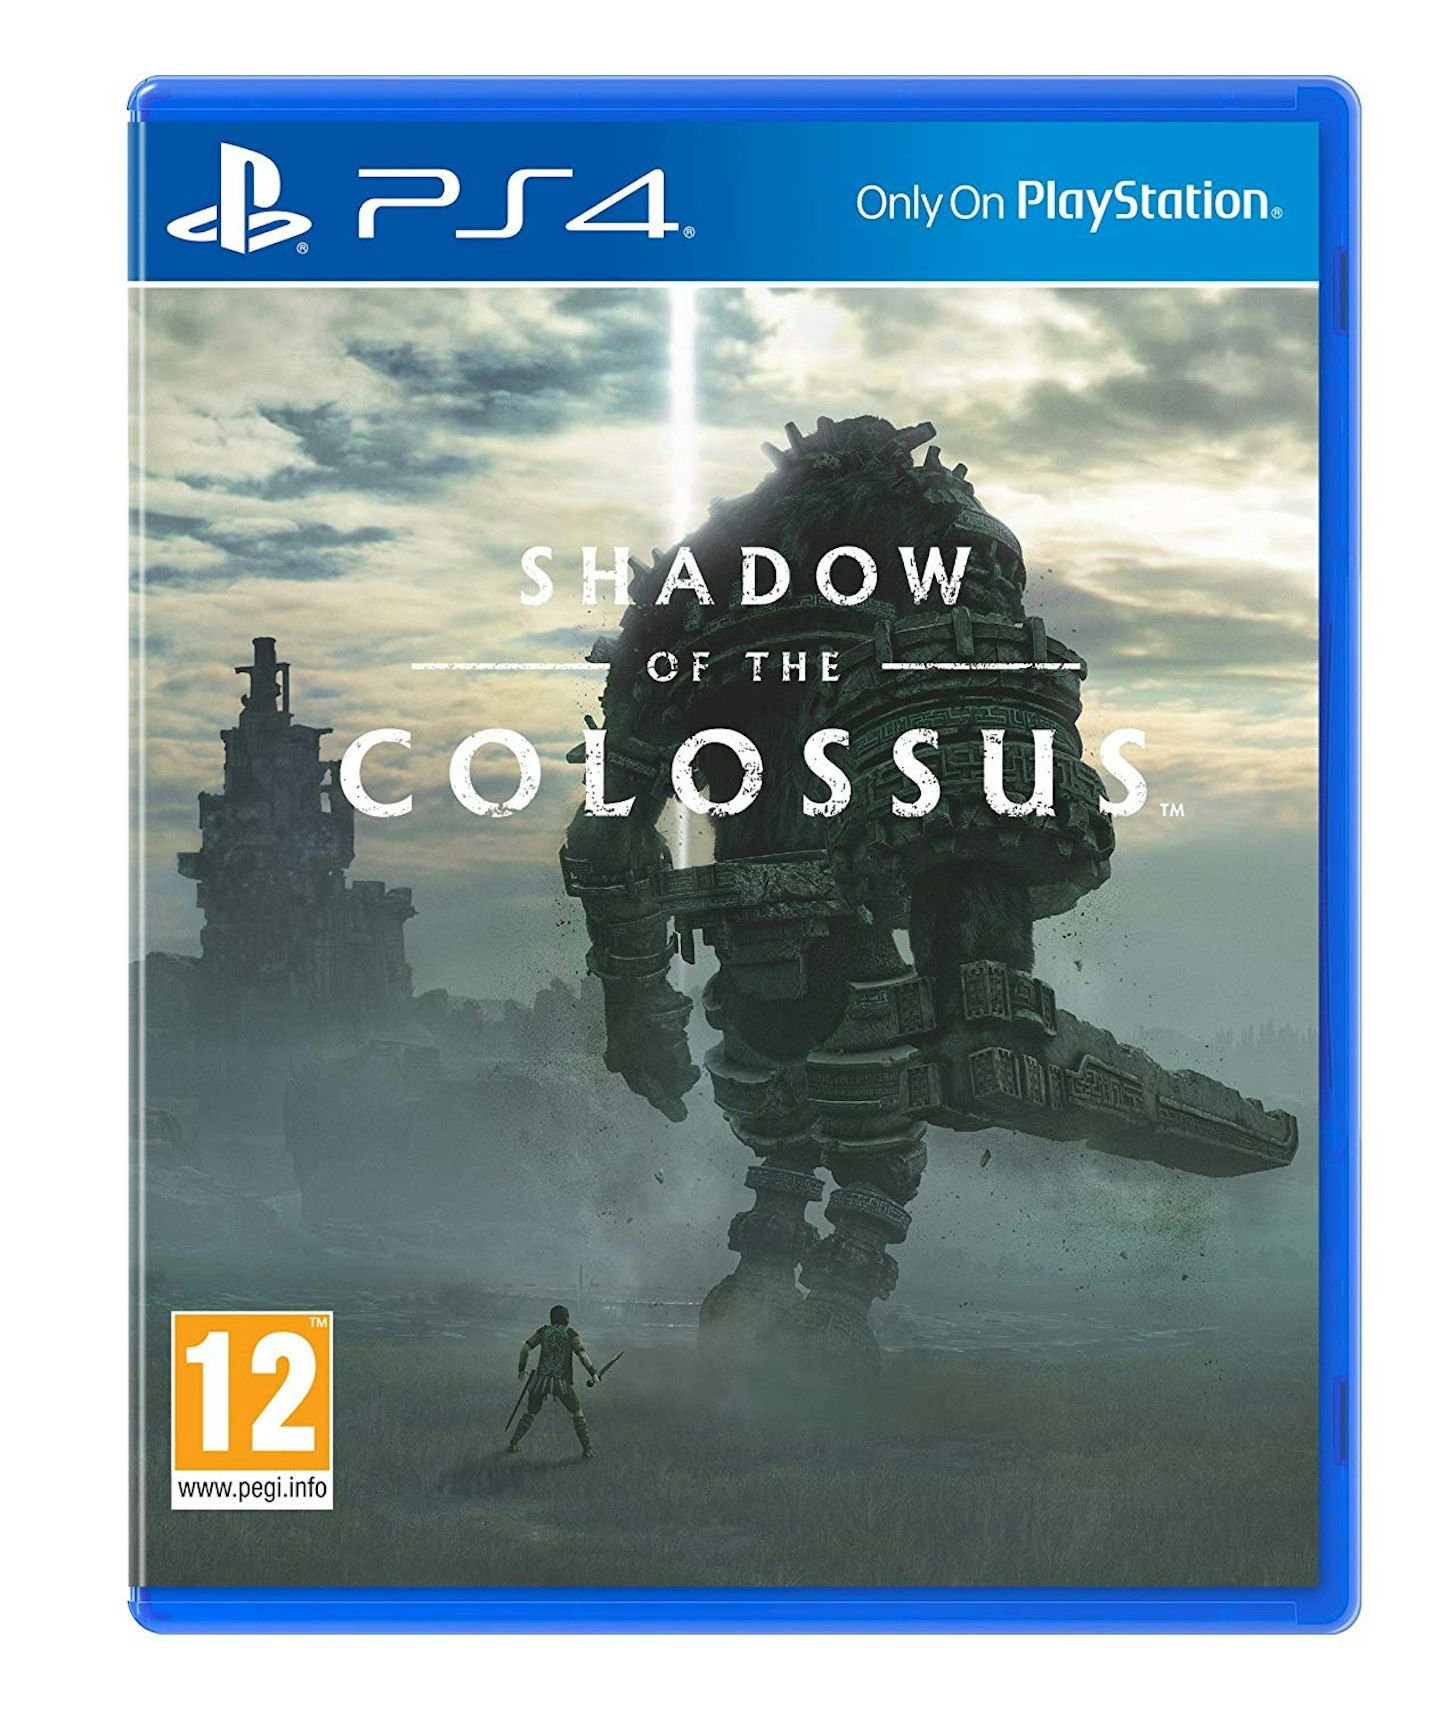 Shadow of the Colossus (PS4), £19.99